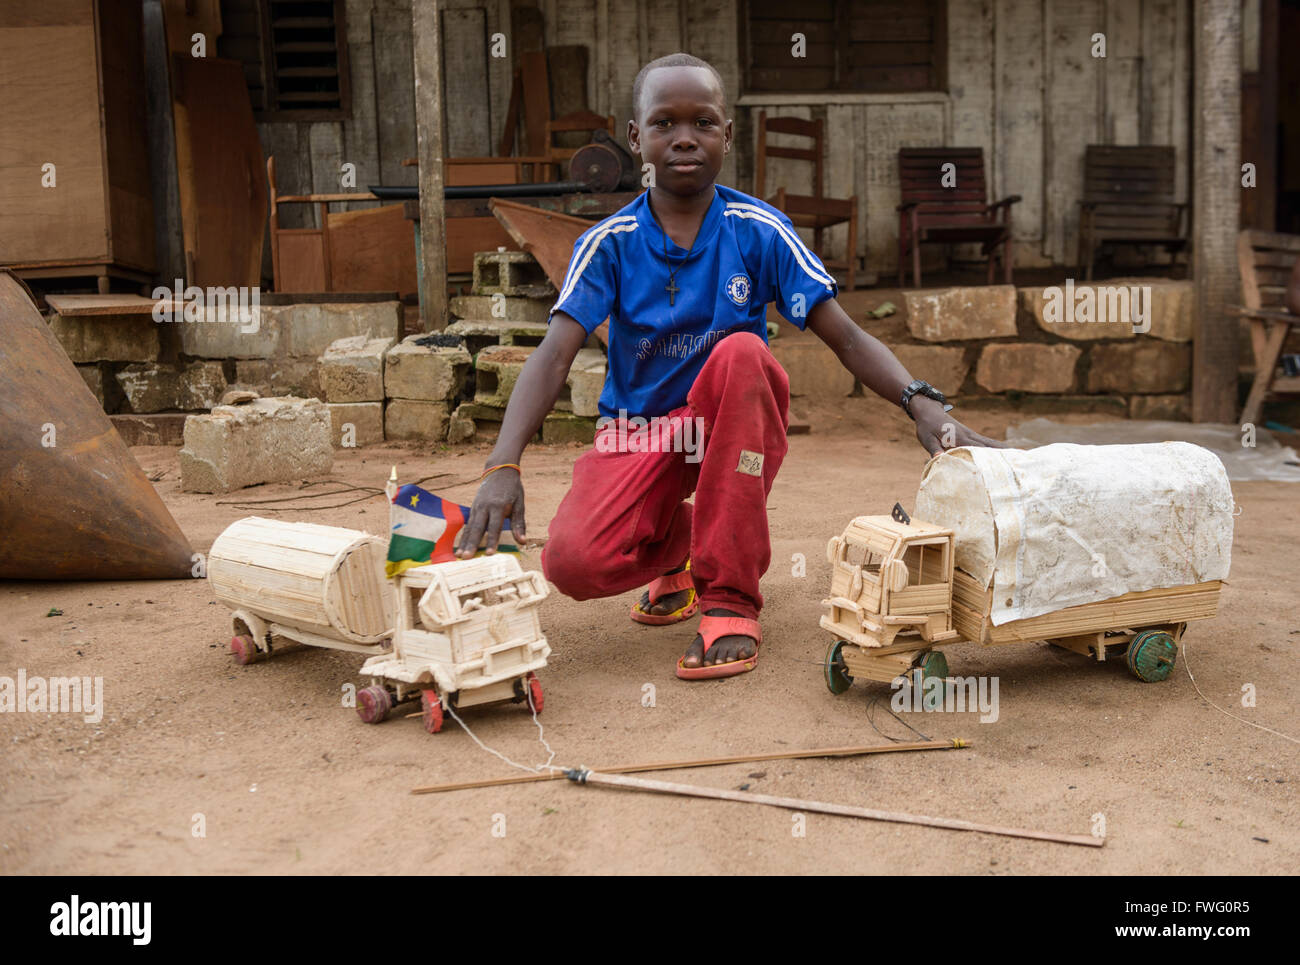 Bantu kid and toys made in Africa, Bayanga, Central African republic Stock Photo